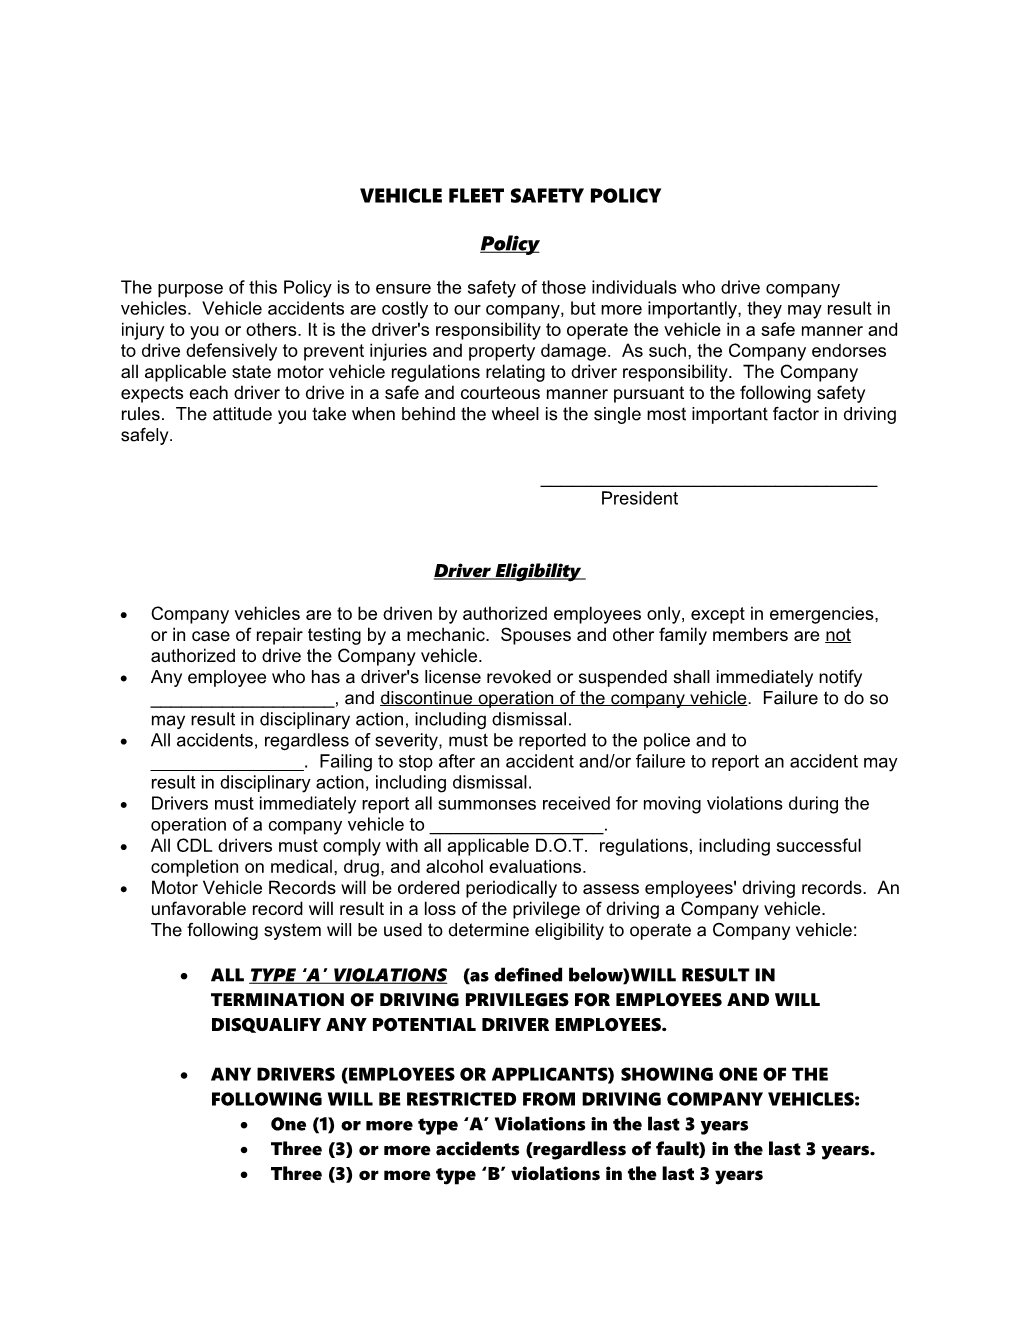 Vehicle Fleet Safety Policy